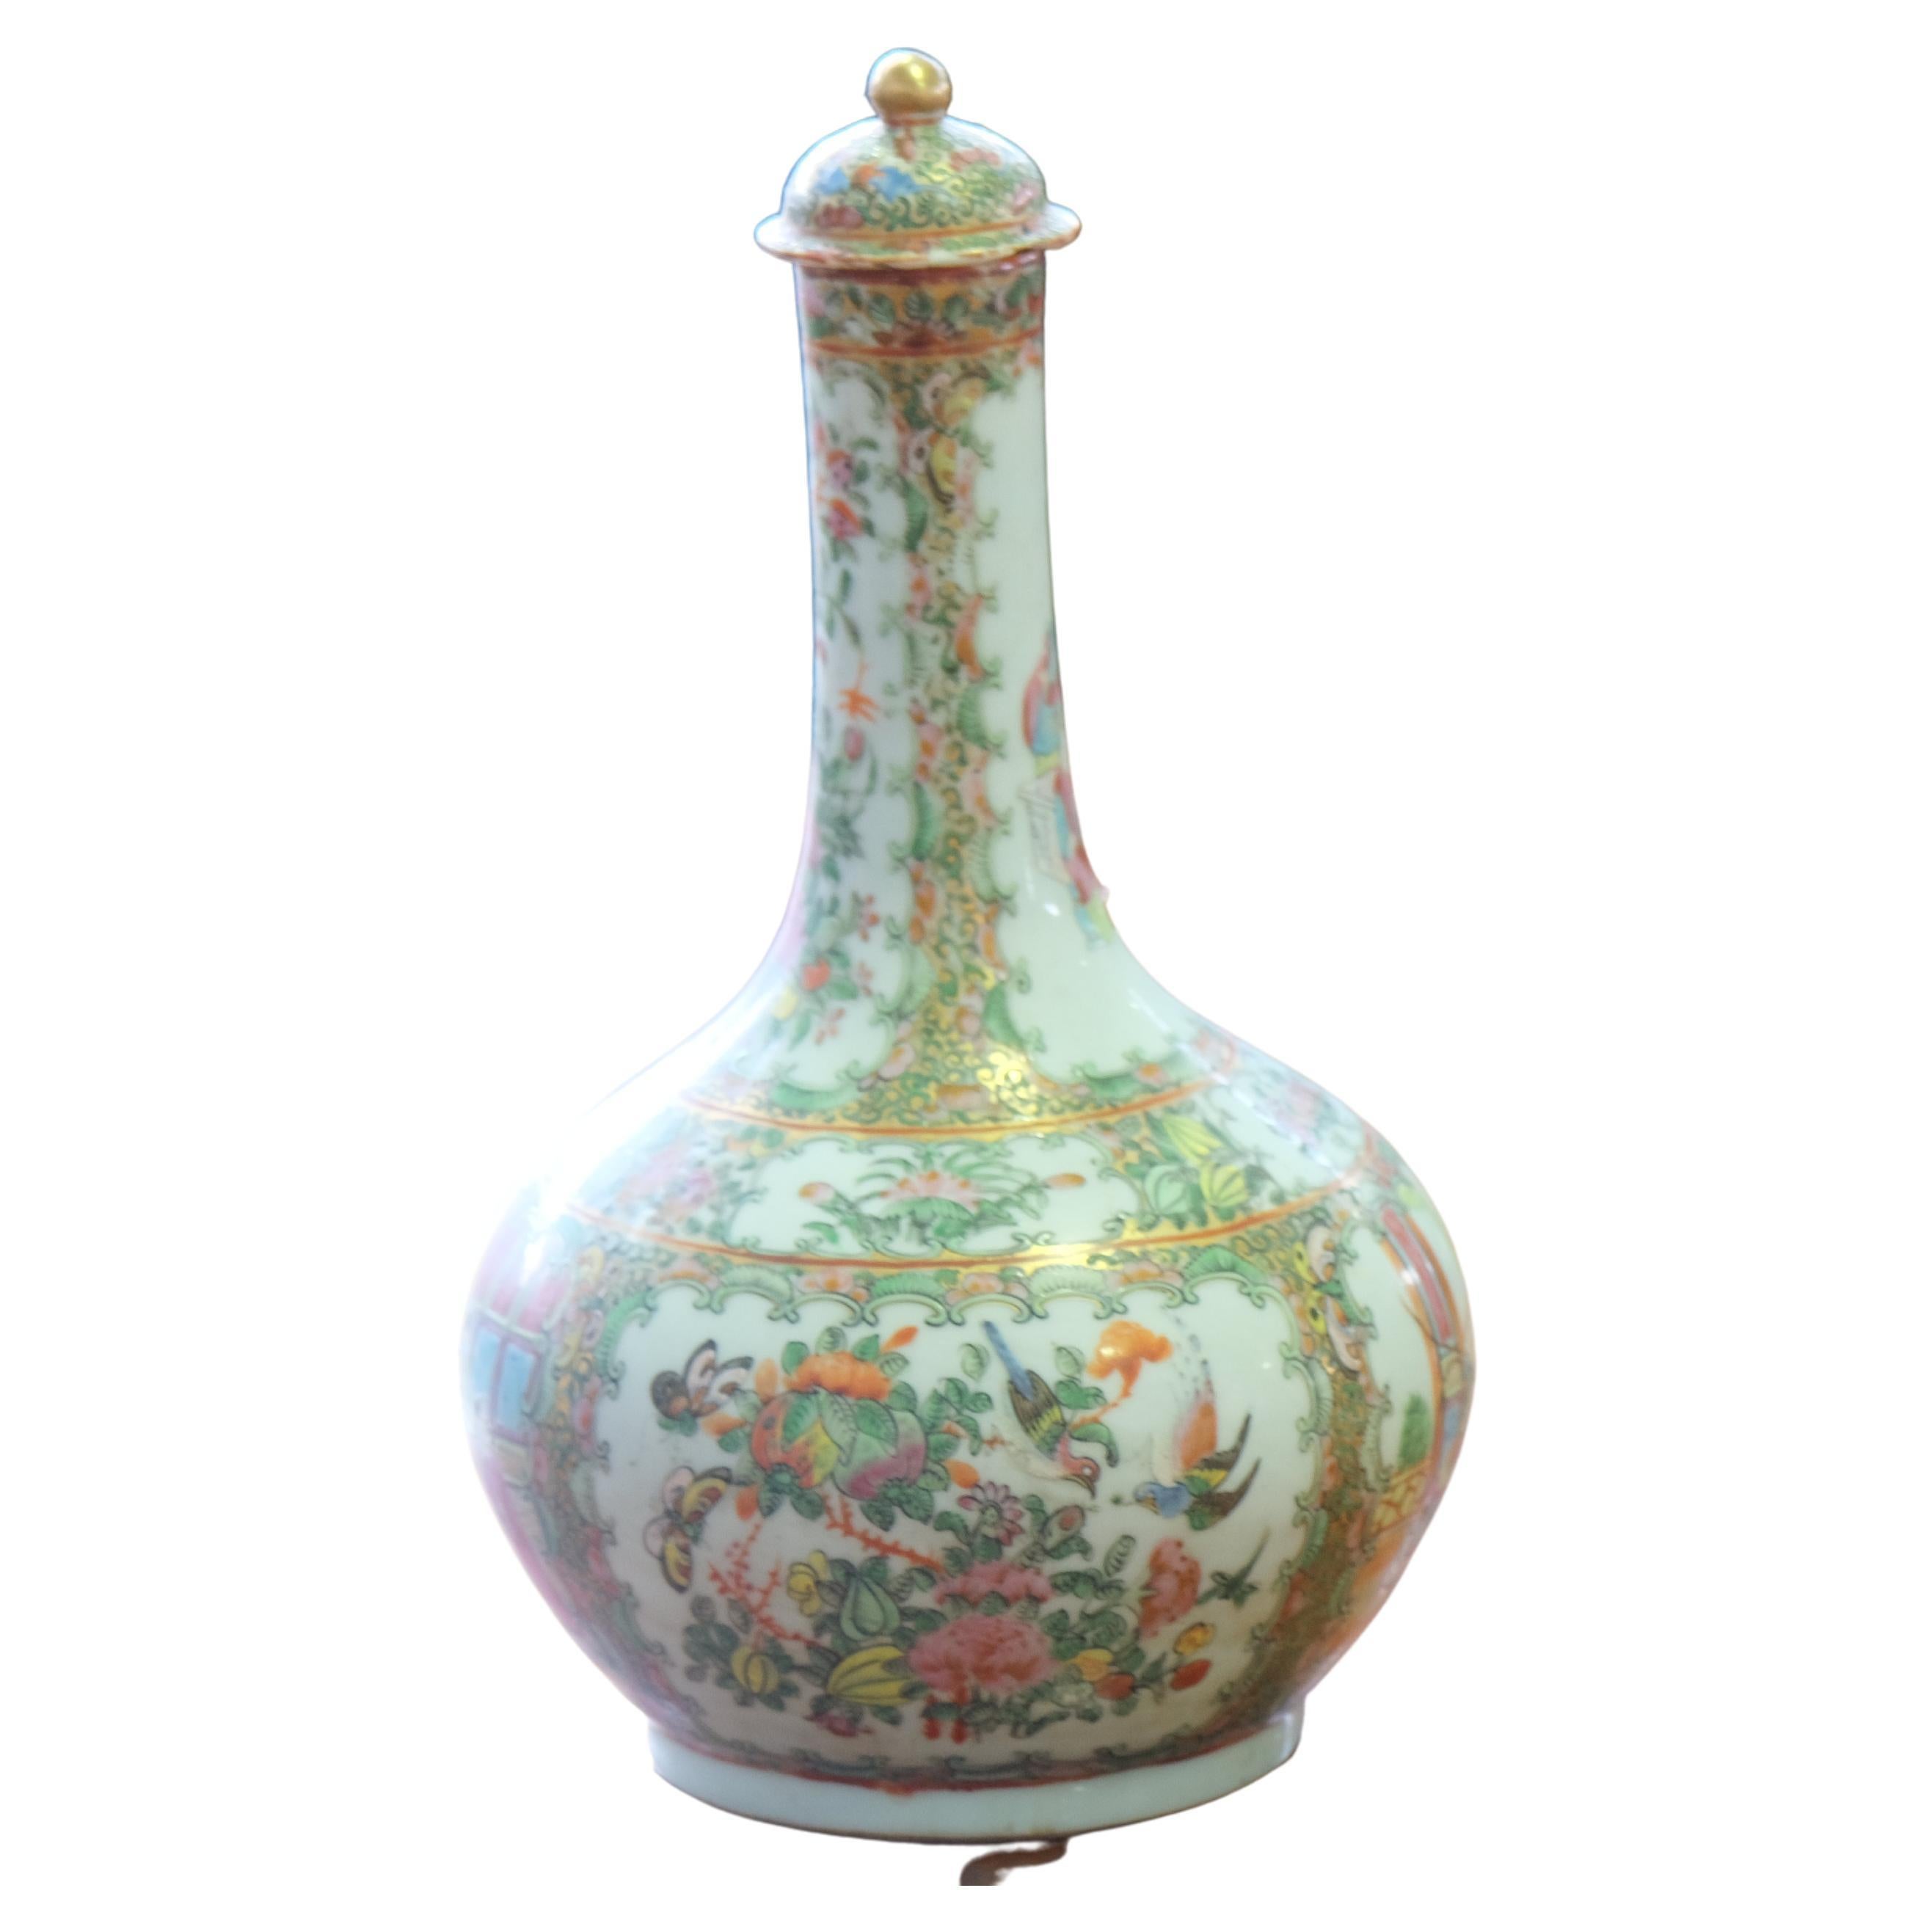 A beautiful Chinese Rose Medallion porcelain lidded water bottle with figural courtyard vignette decoration and butterfly, bird, insect and floral vignette decoration. Perfect from home design and decoration.